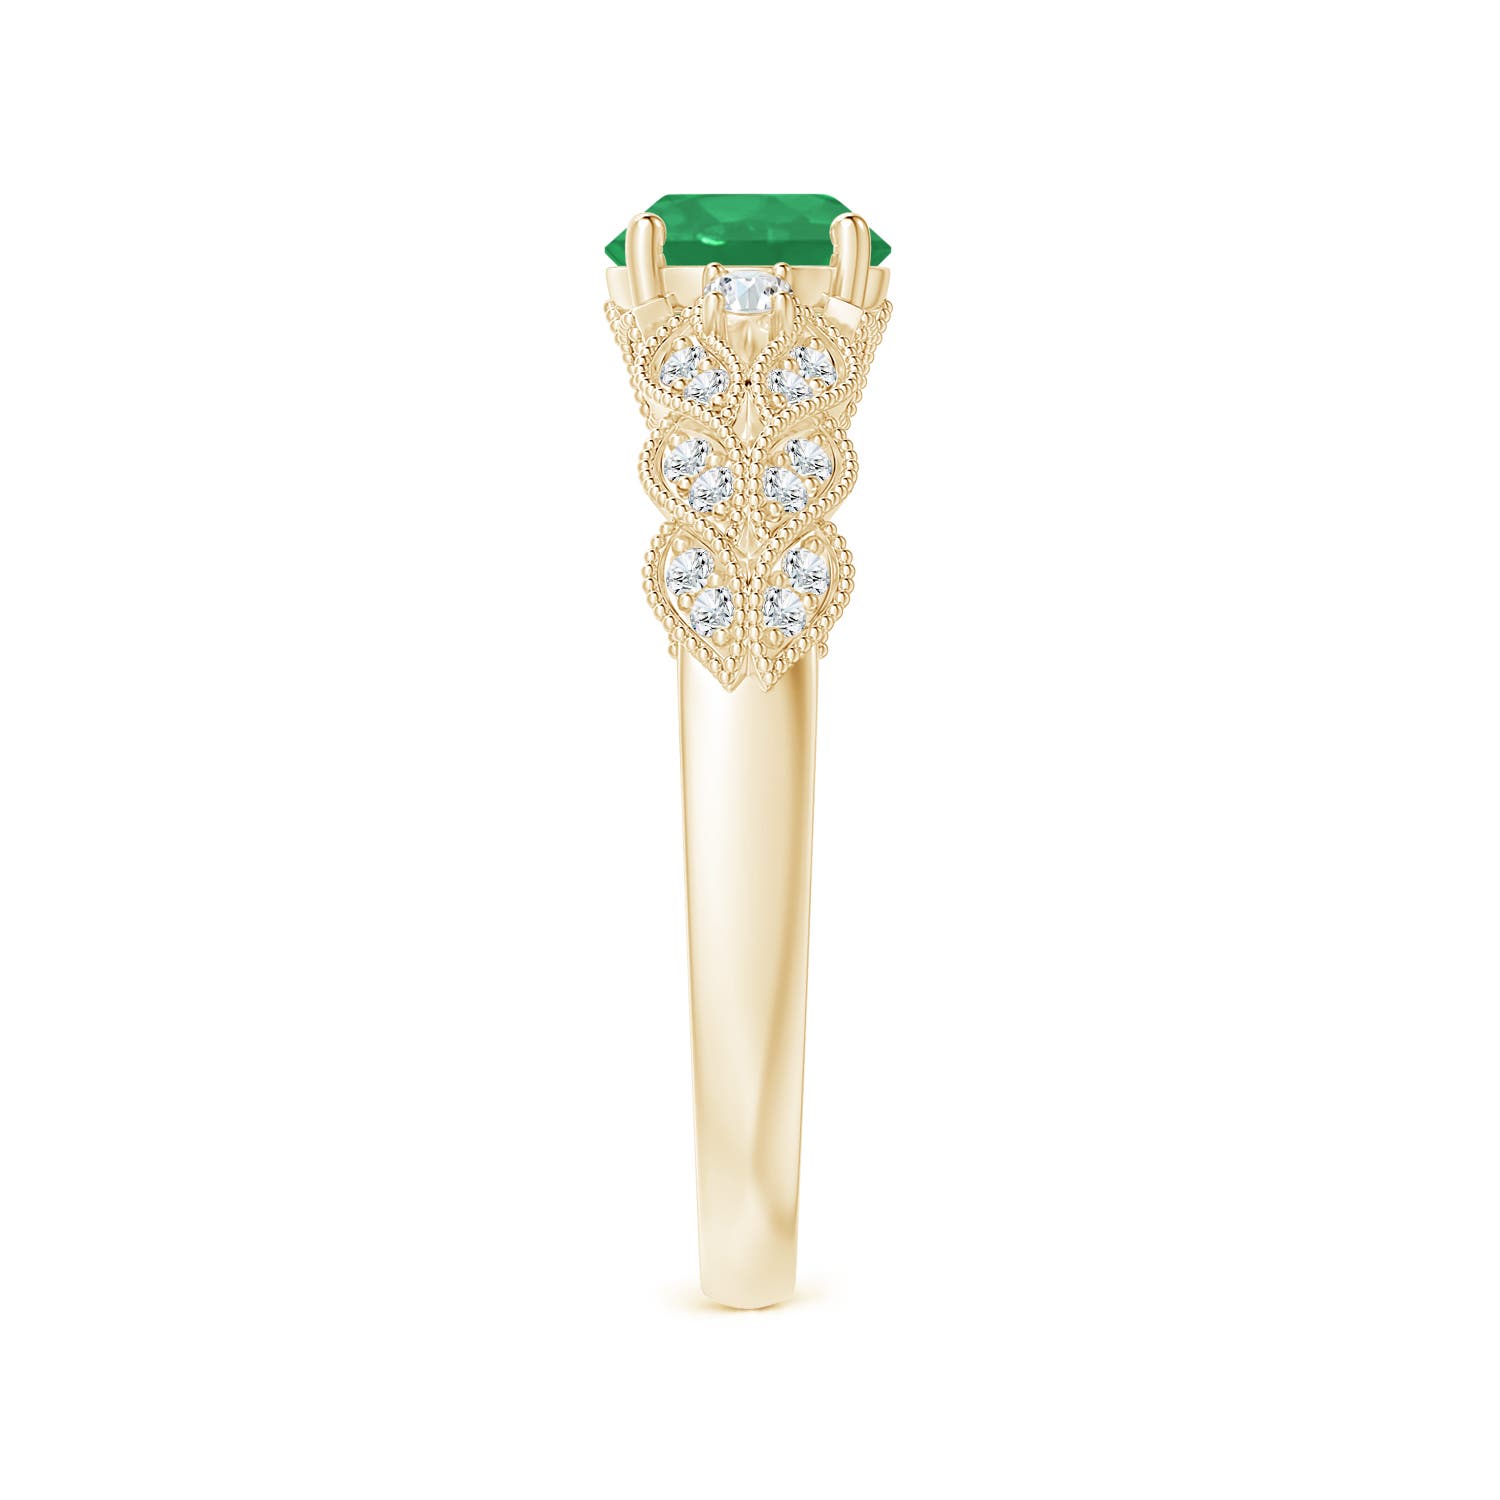 A - Emerald / 0.94 CT / 14 KT Yellow Gold